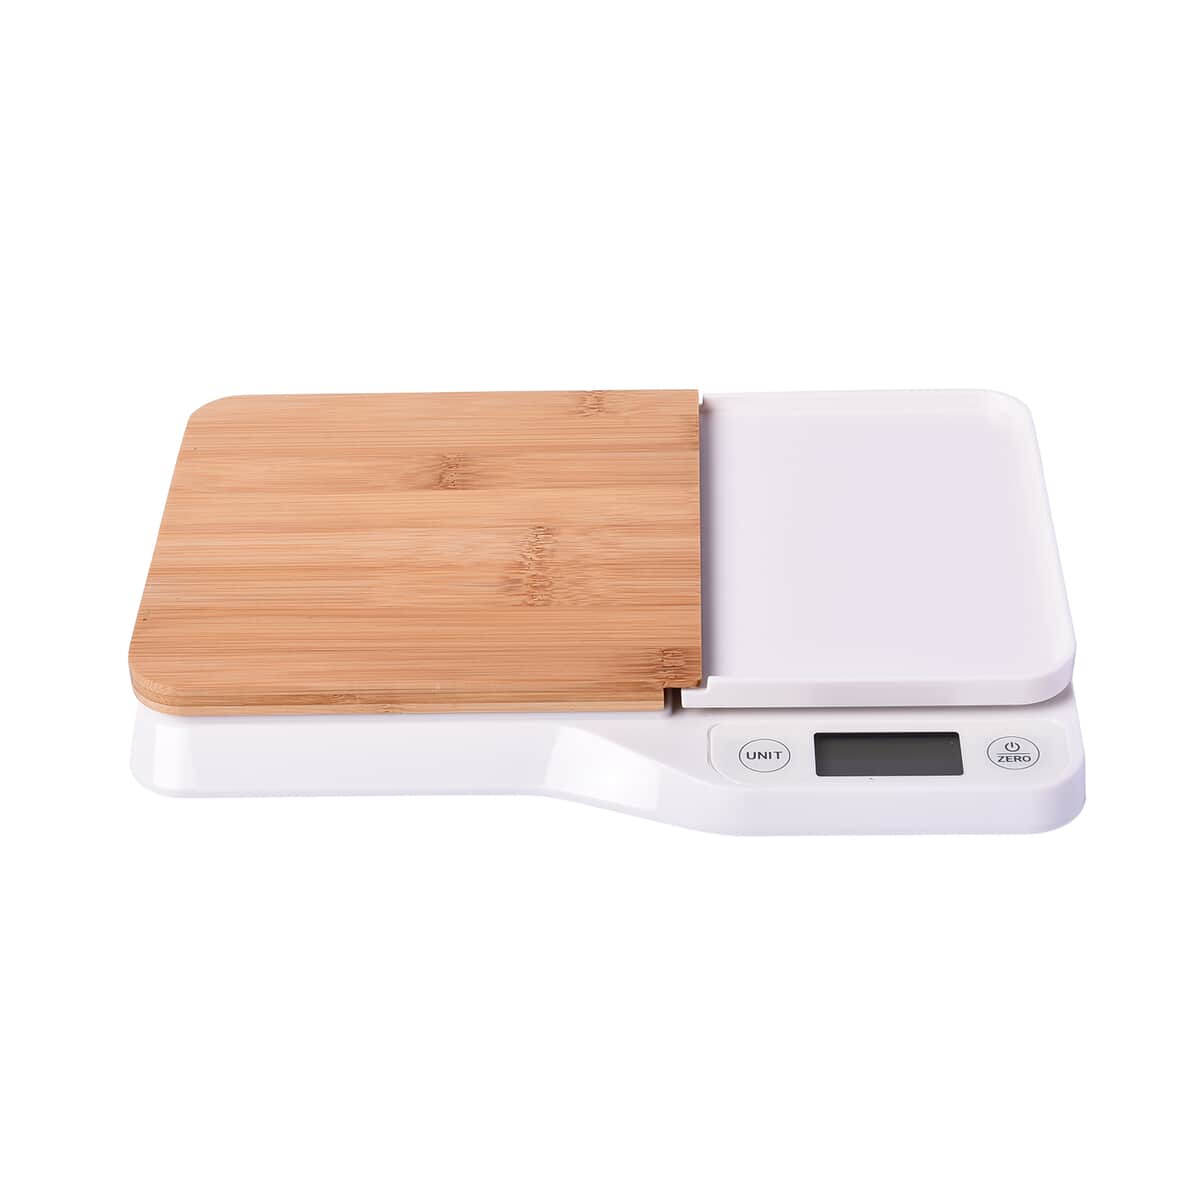 Cutting Board with Digital Electronic Household Kitchen Scale (2xAAA Battery Not Included) image number 0